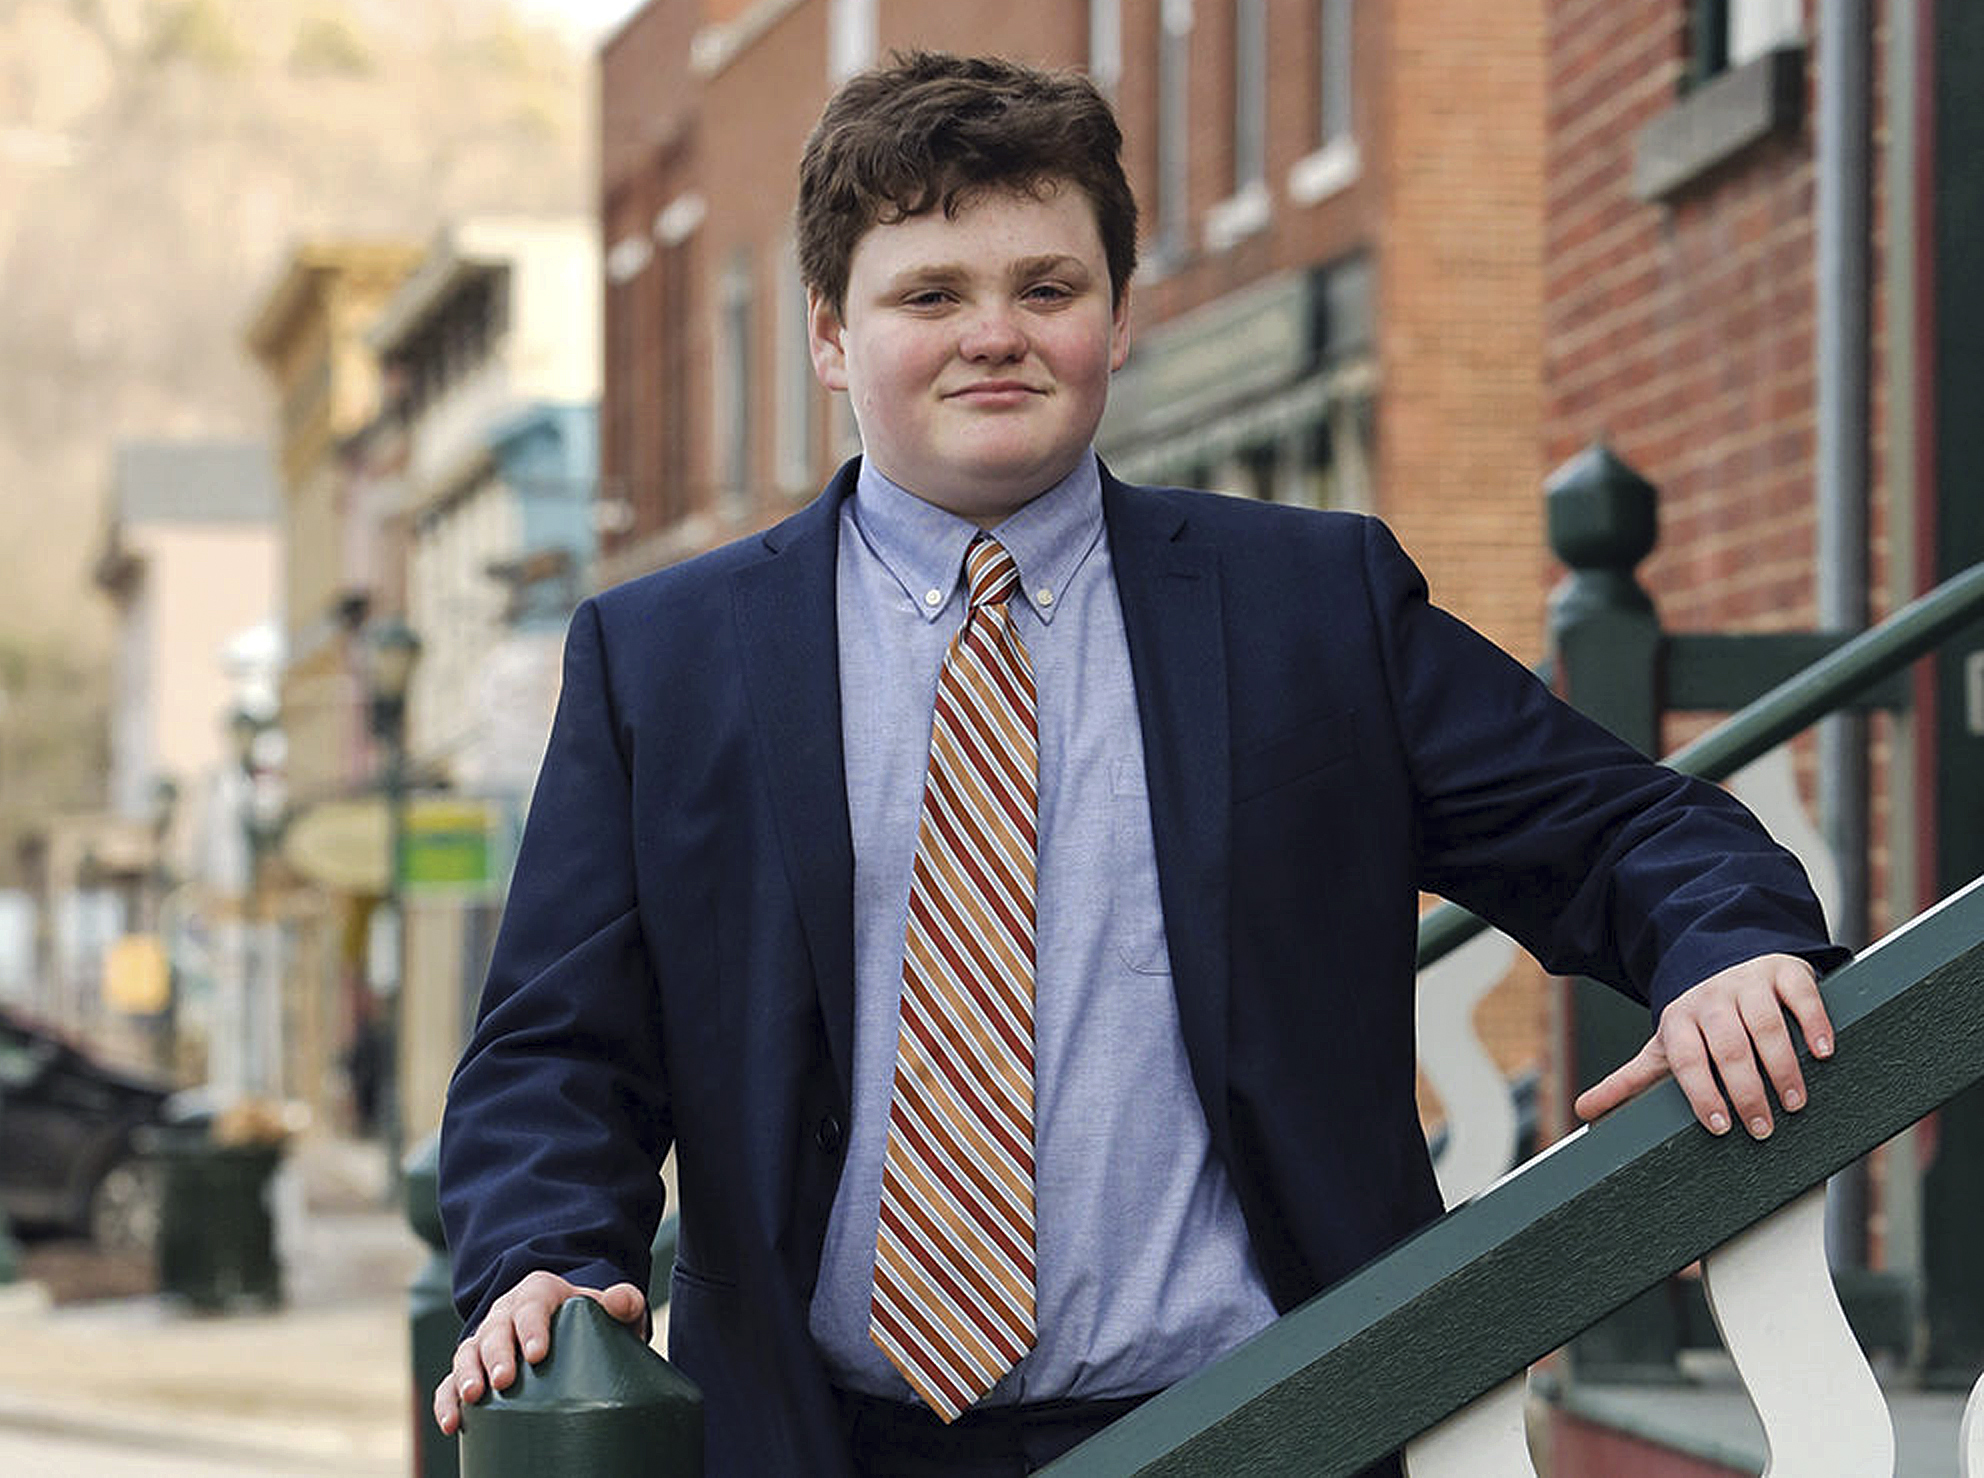 Meet Ethan Sonnebon, the 14-Year-Old Running for Governor of Vermont With 'Practical Progressive Ideas'